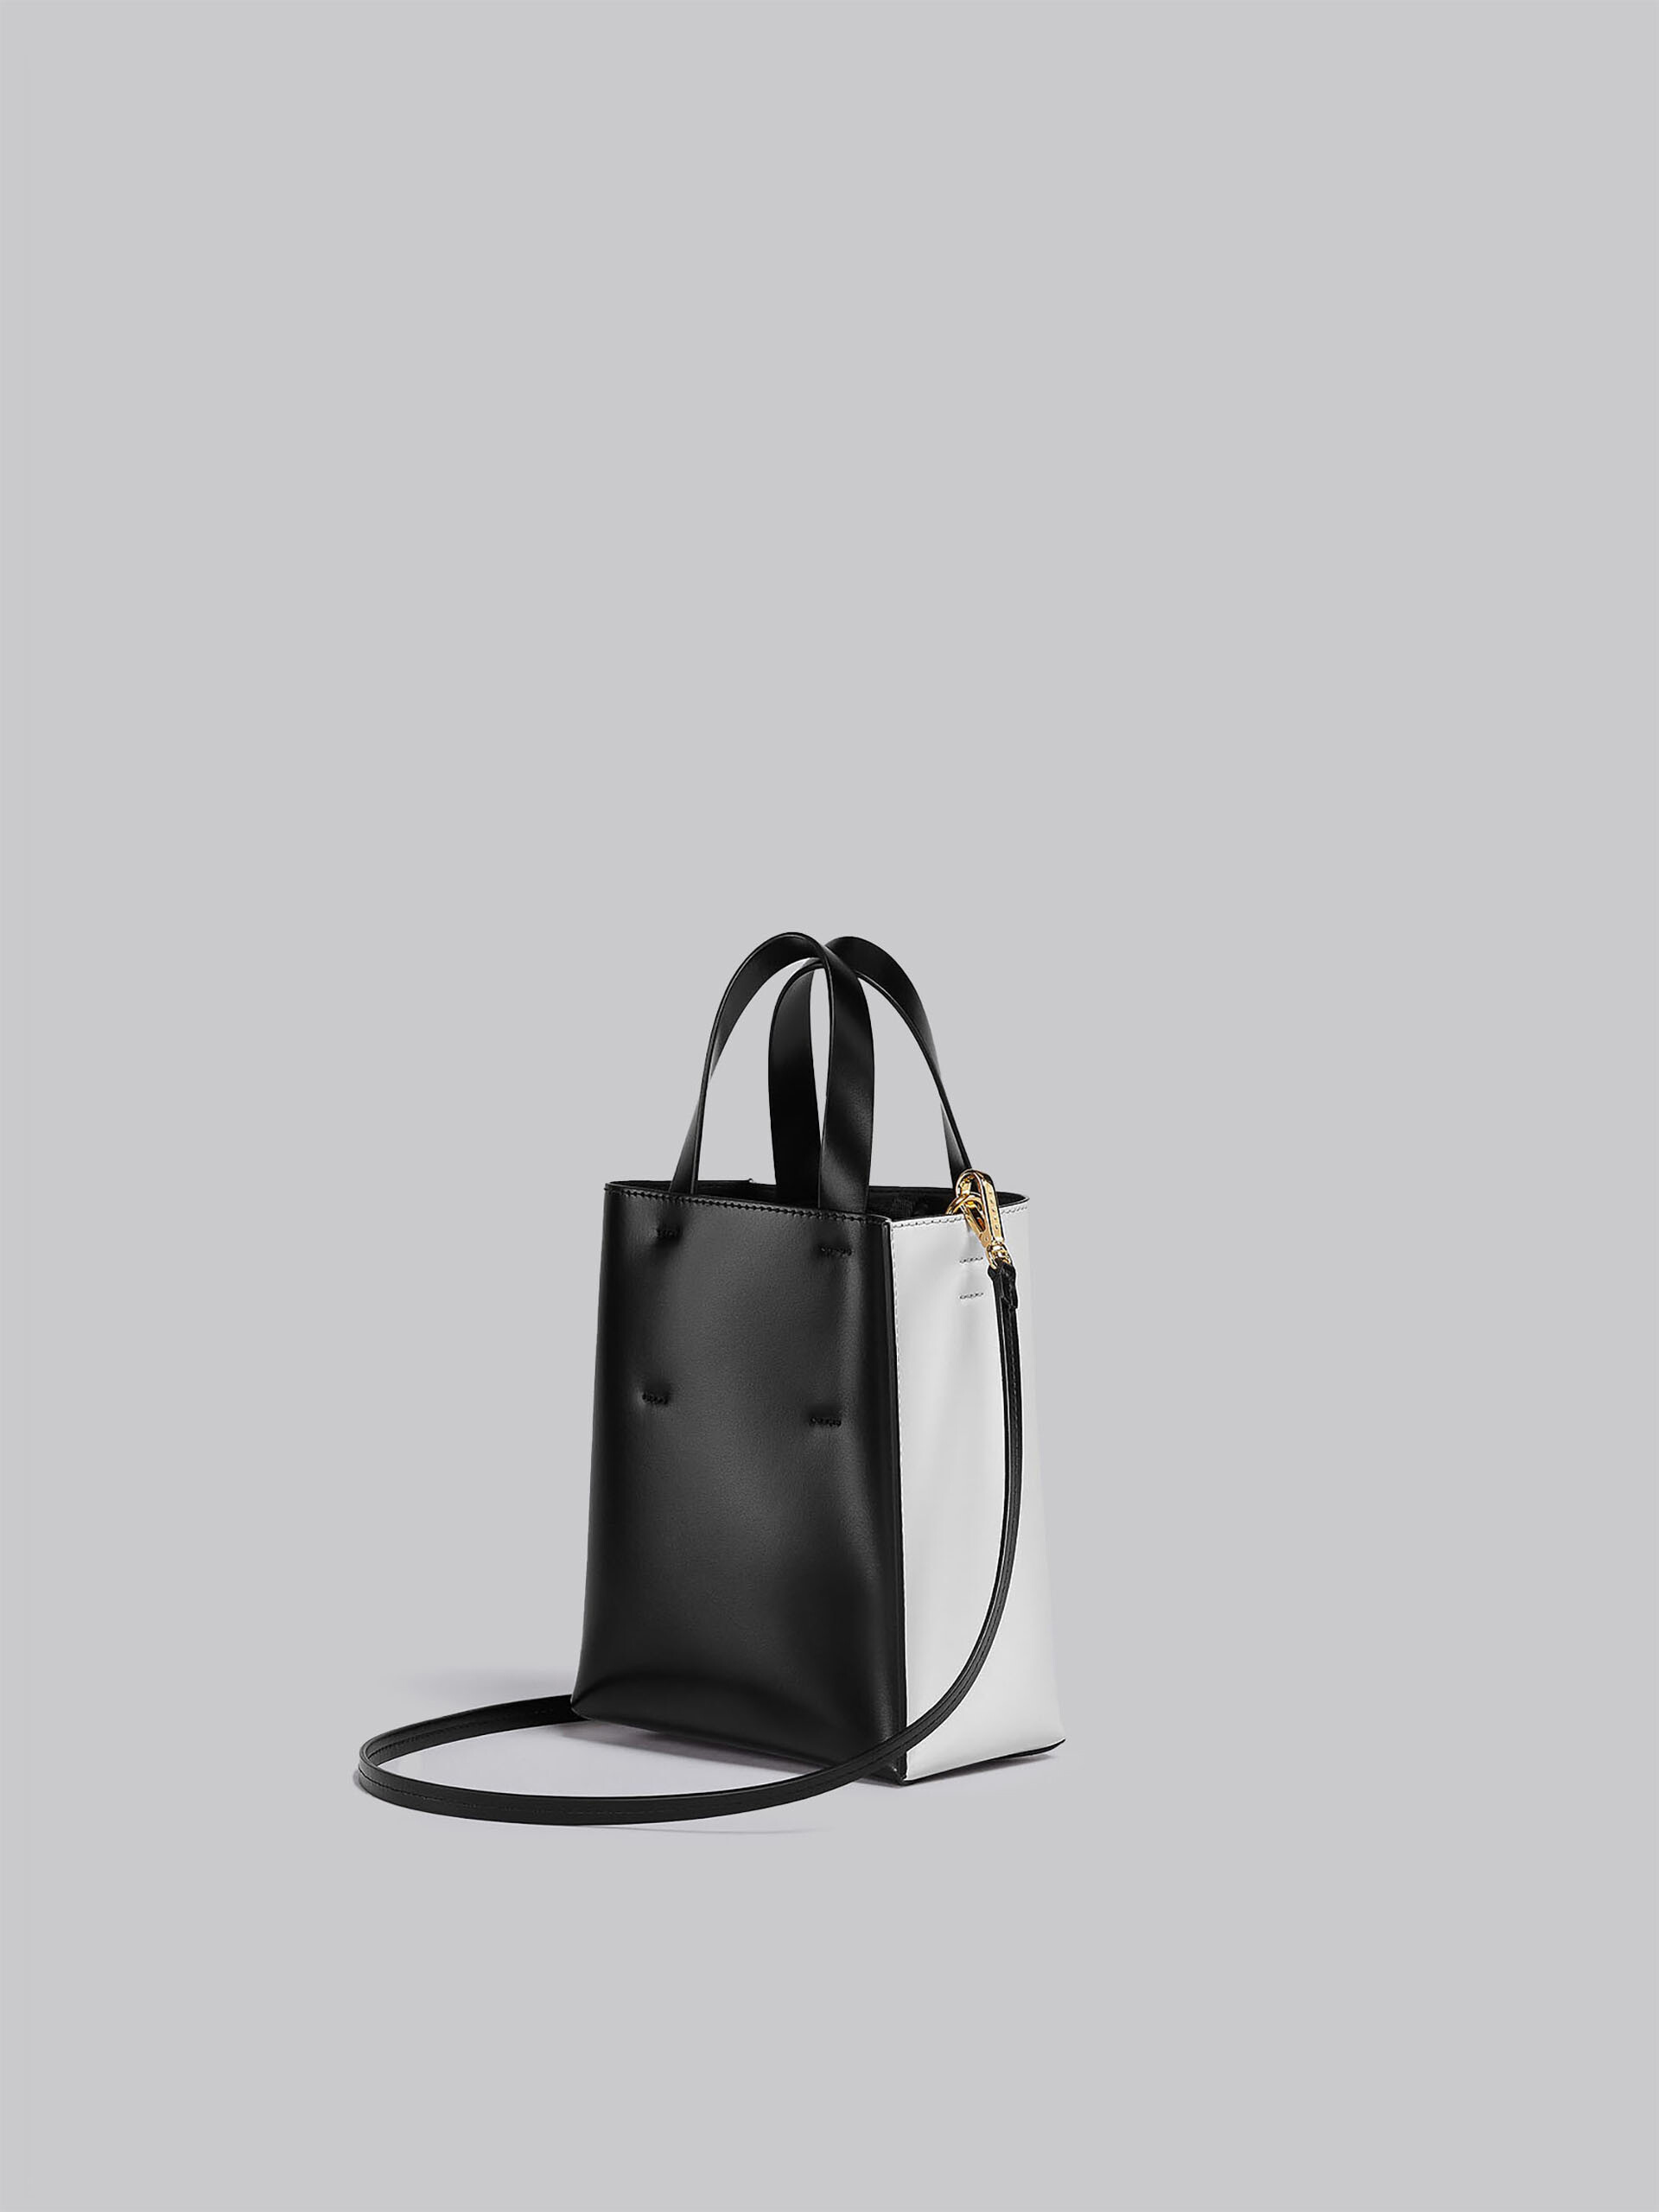 MUSEO mini bag in white and black leather - Shopping Bags - Image 3